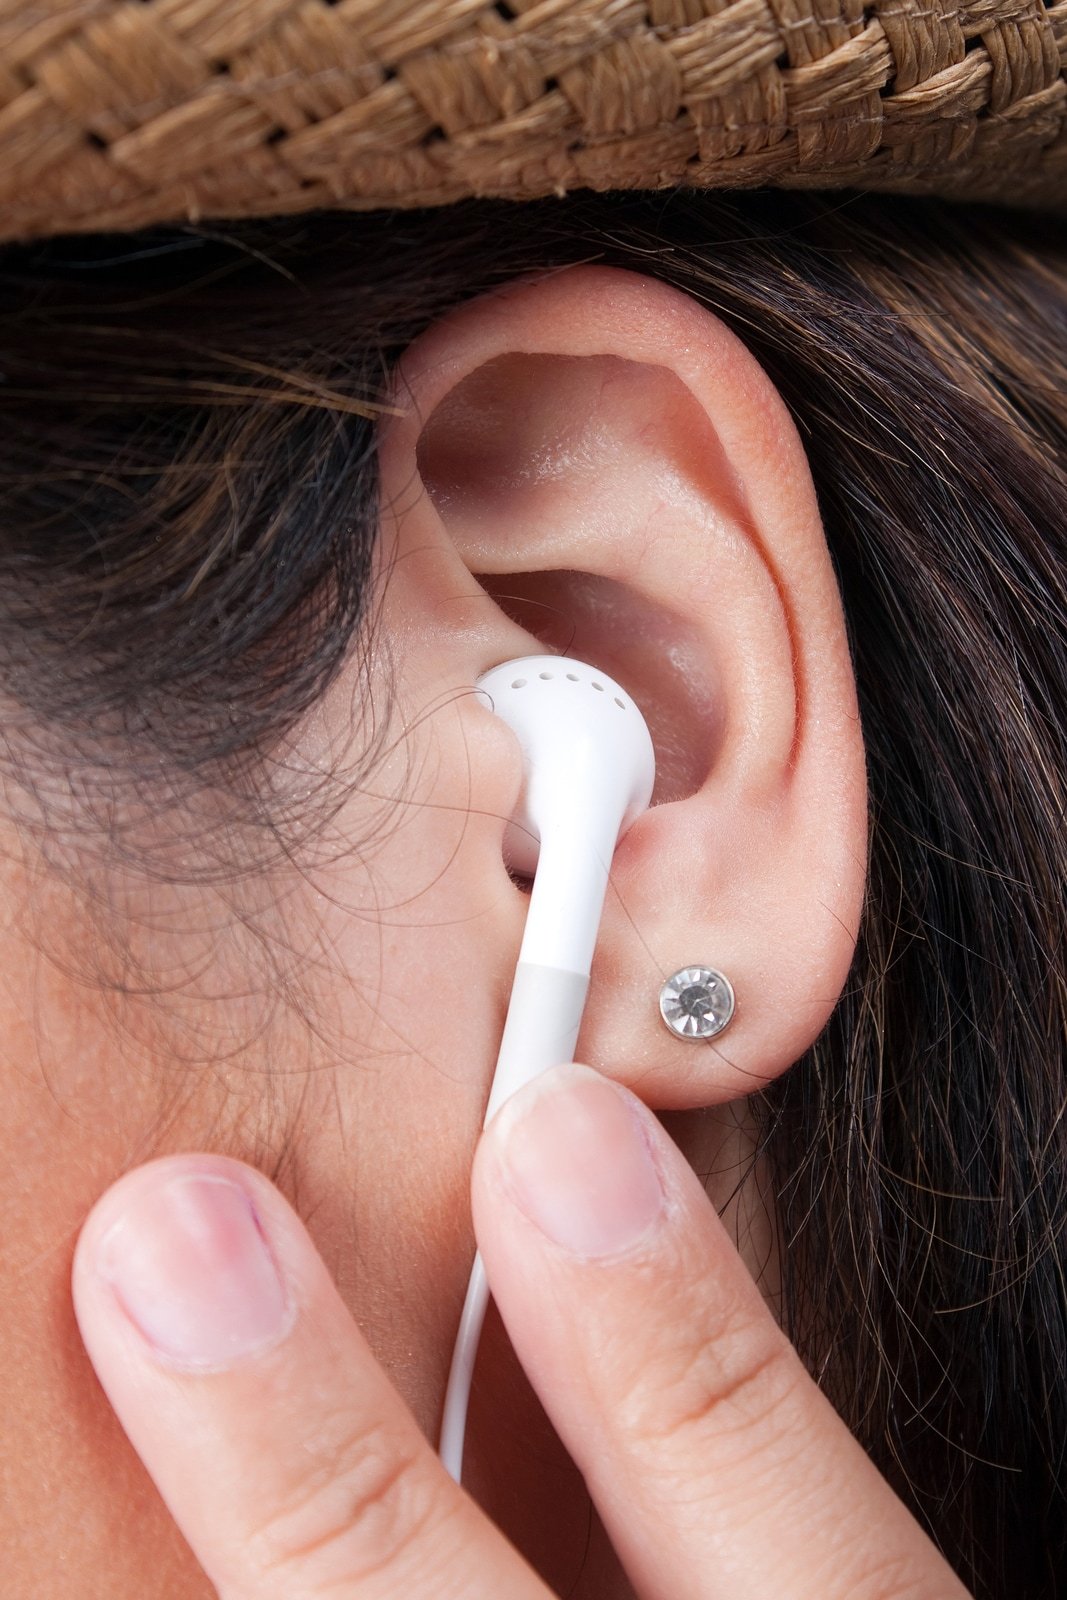 Hearing loss may be caused by cities noises and music ...